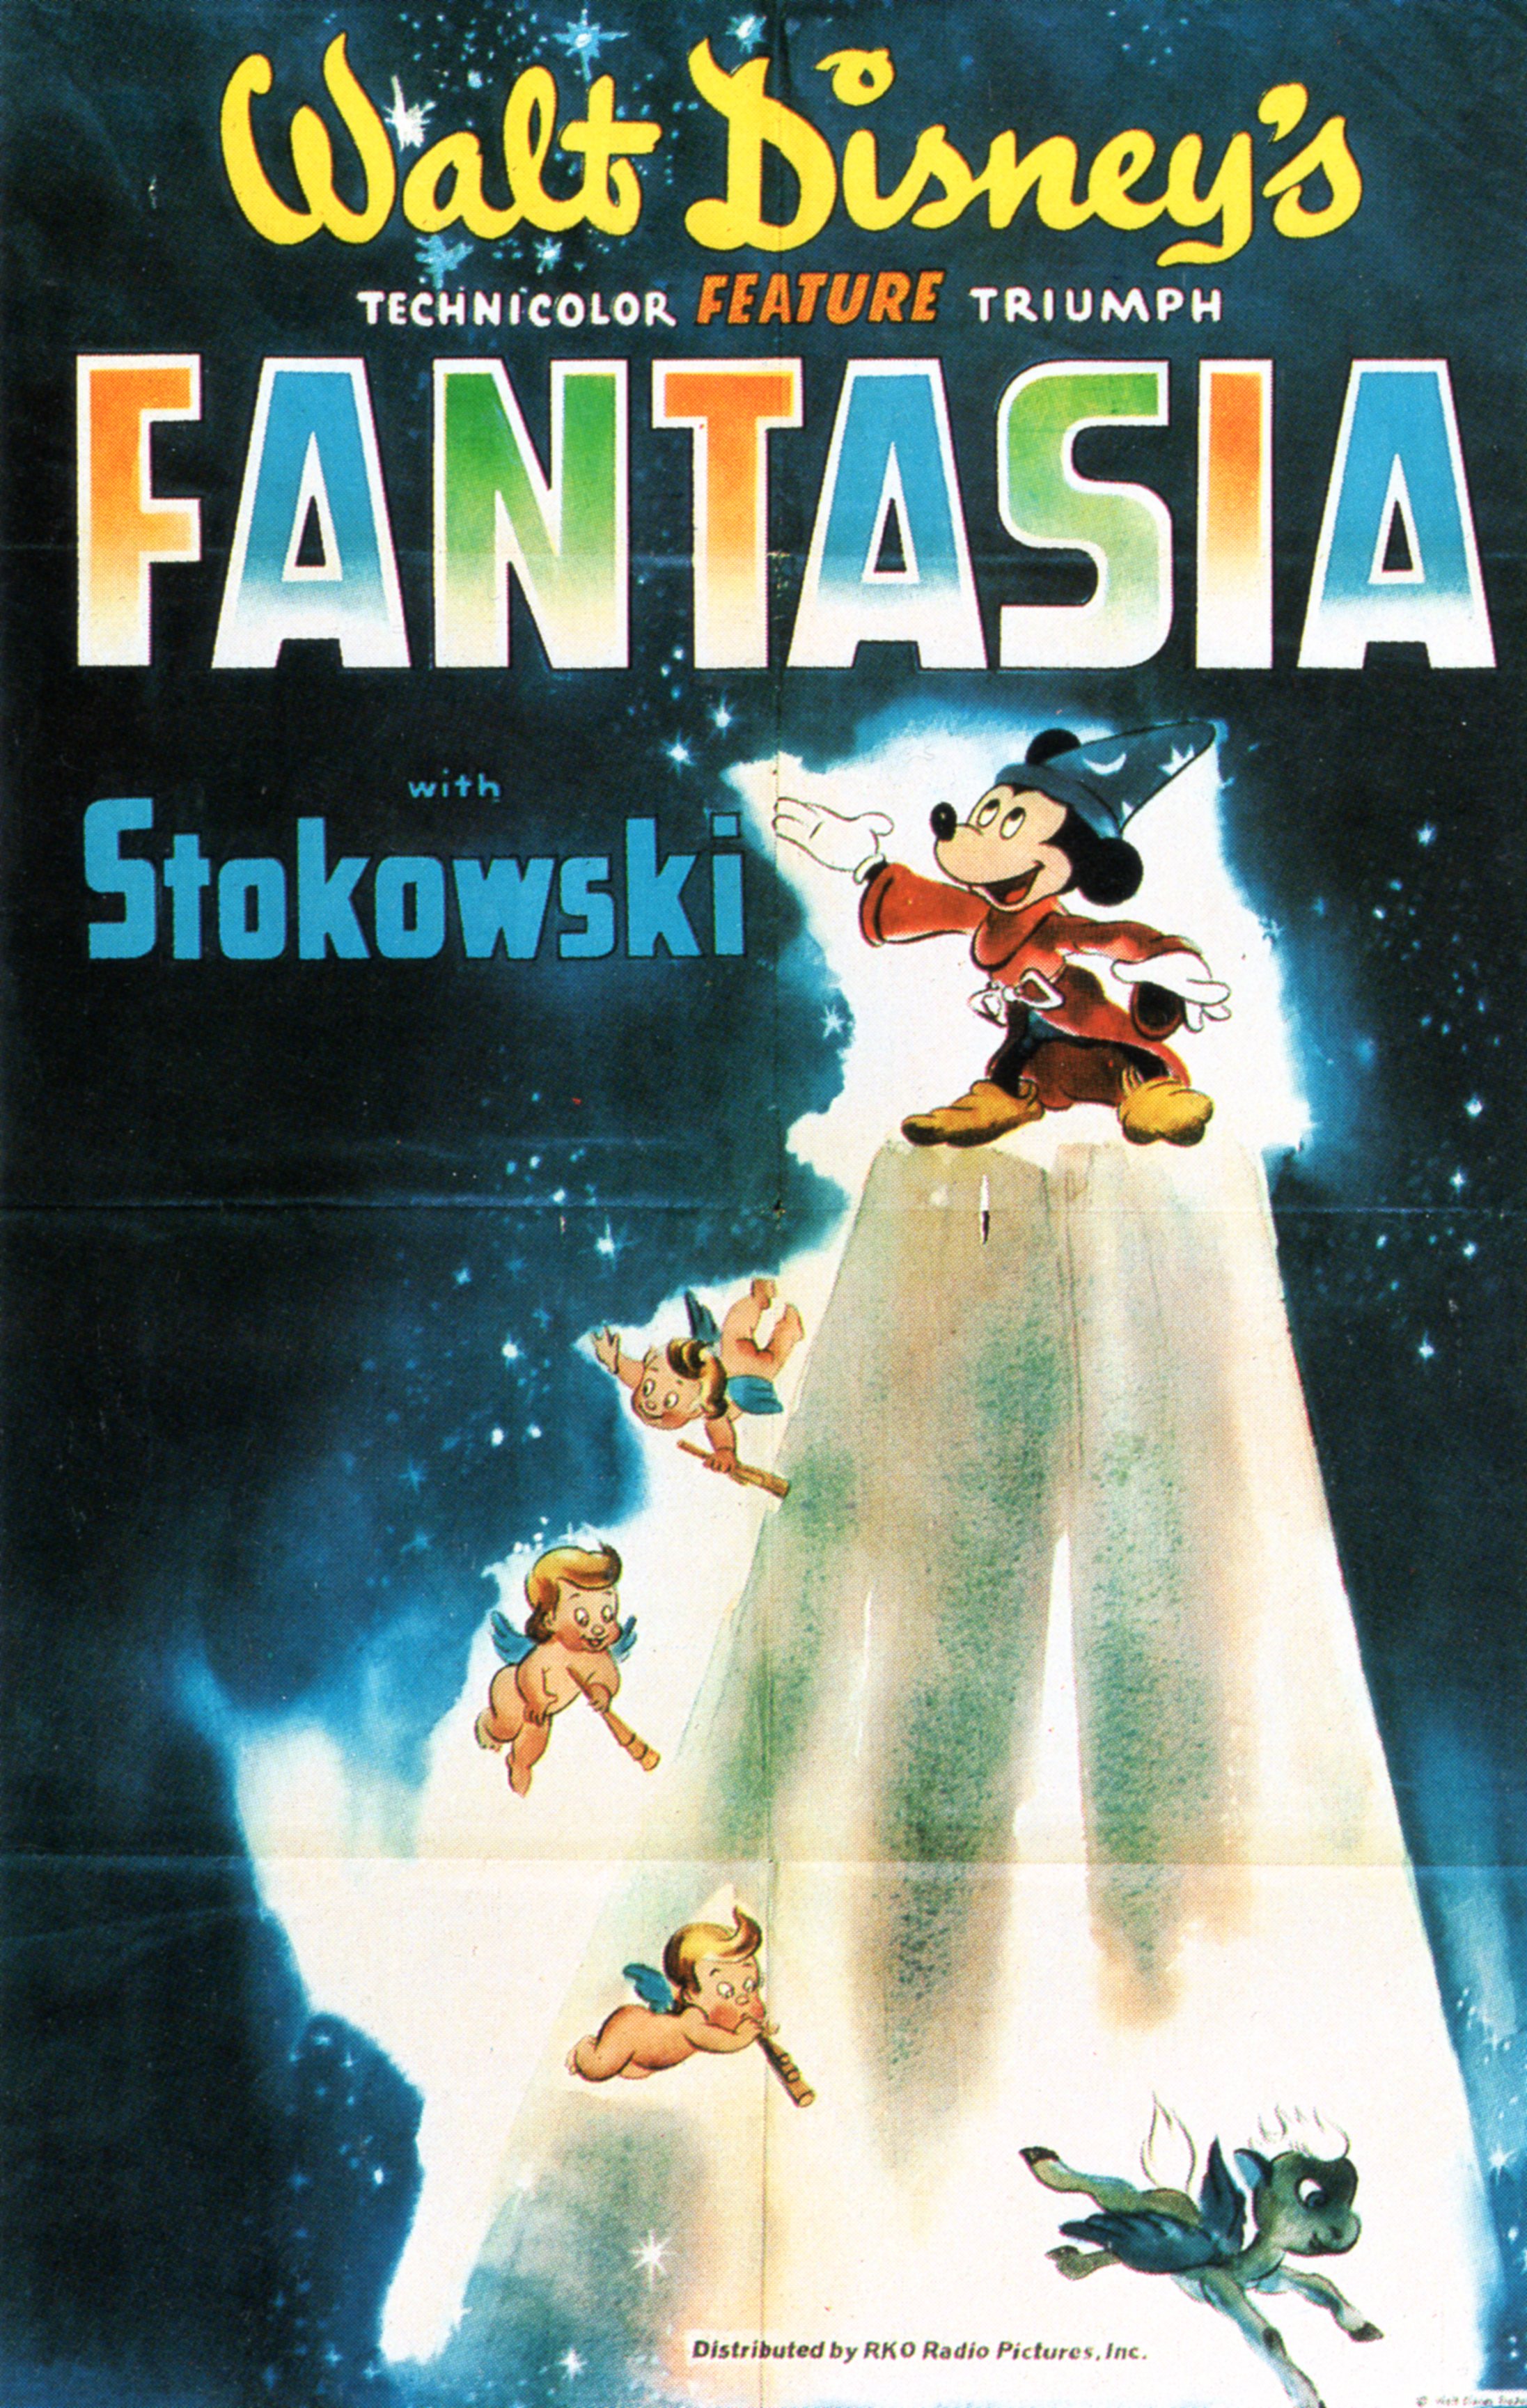 https://static.wikia.nocookie.net/disney/images/1/12/Fantasia-poster-1940.jpg/revision/latest?cb=20110715005424